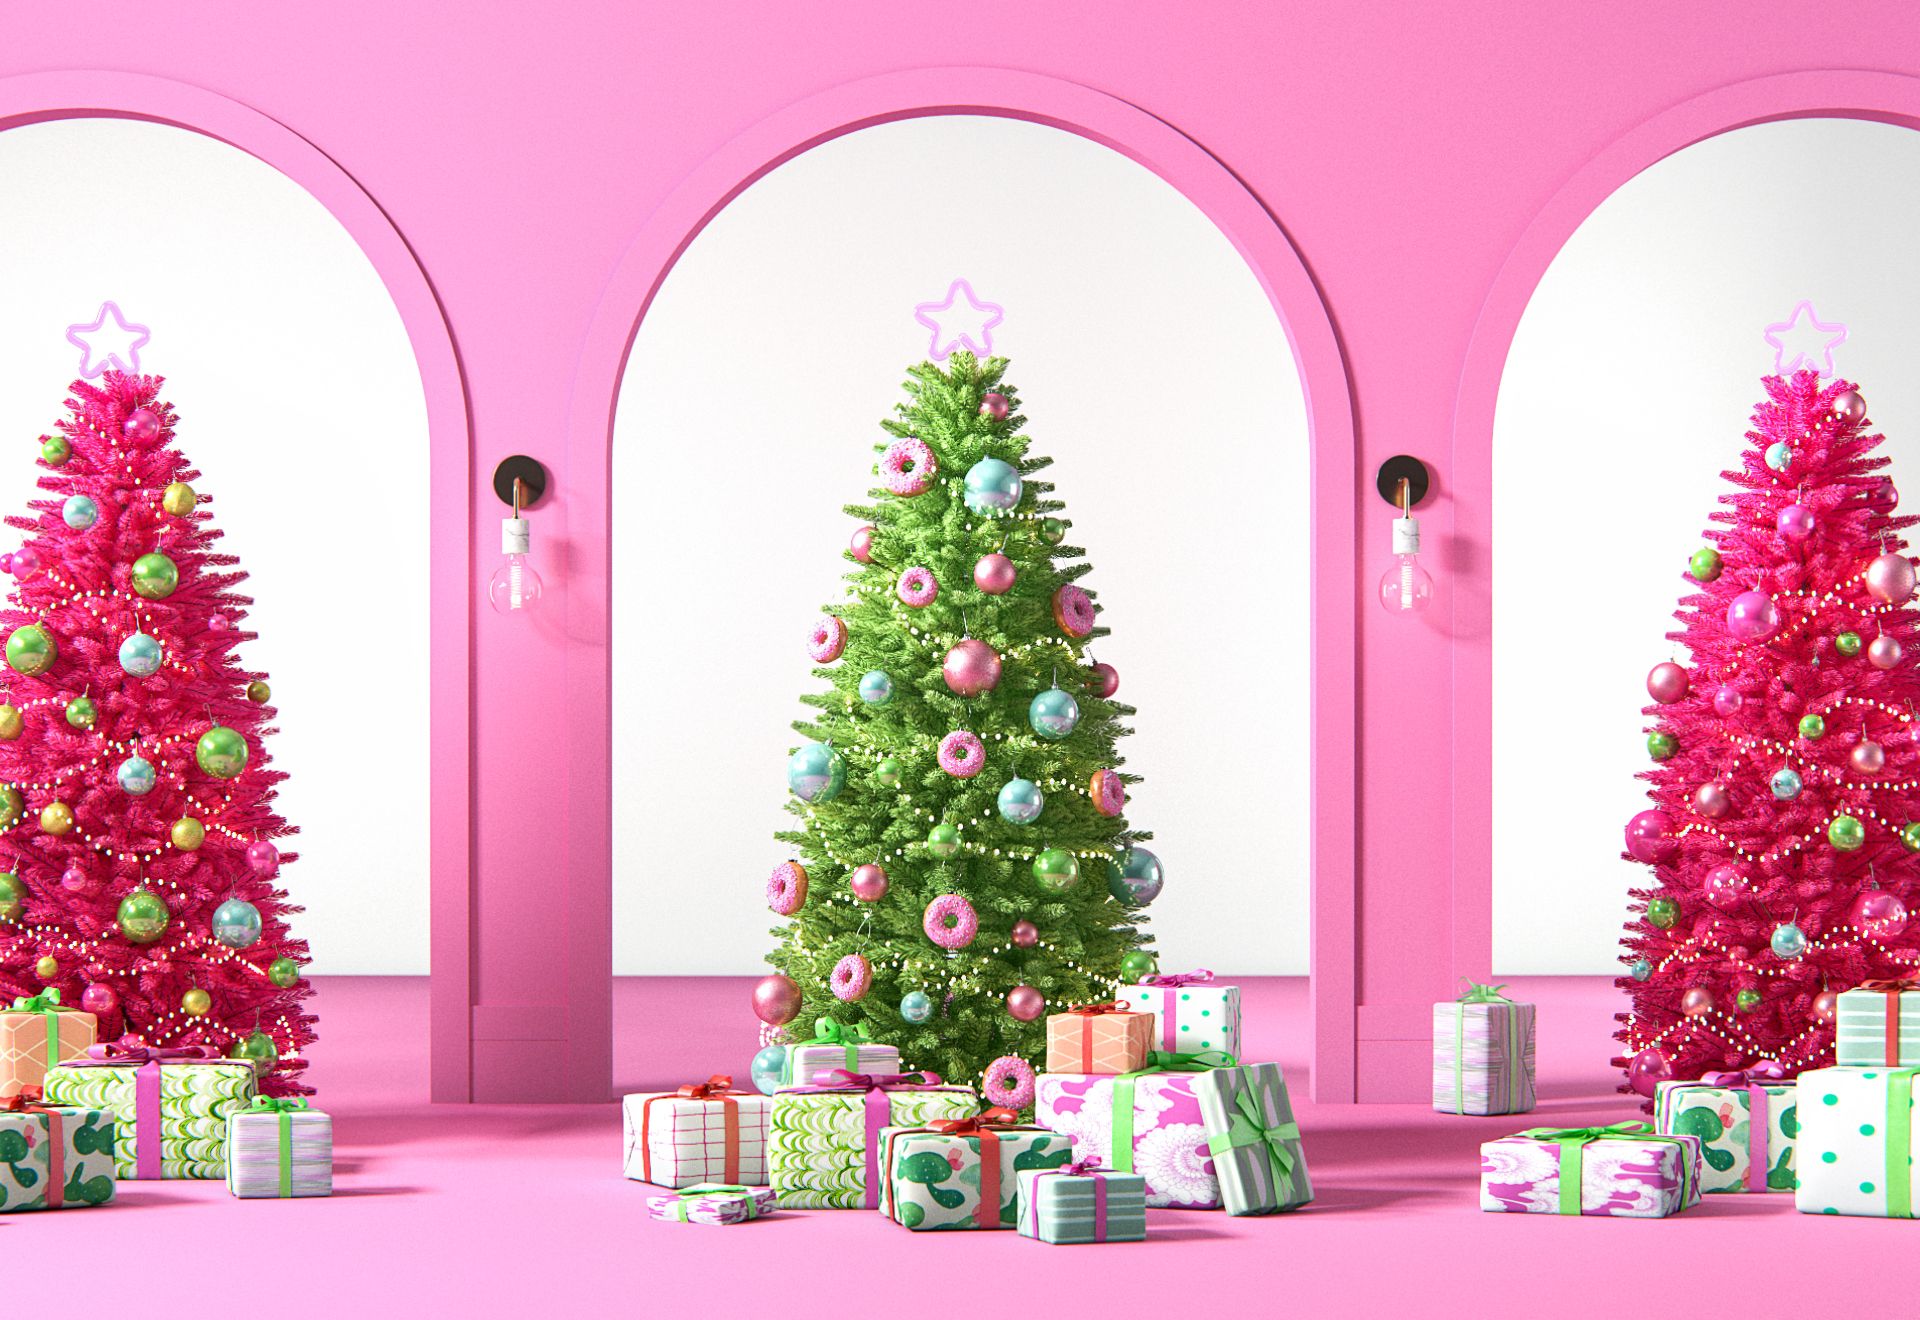 Search Volume For Pink Christmas Trees Is Up 125 This Year